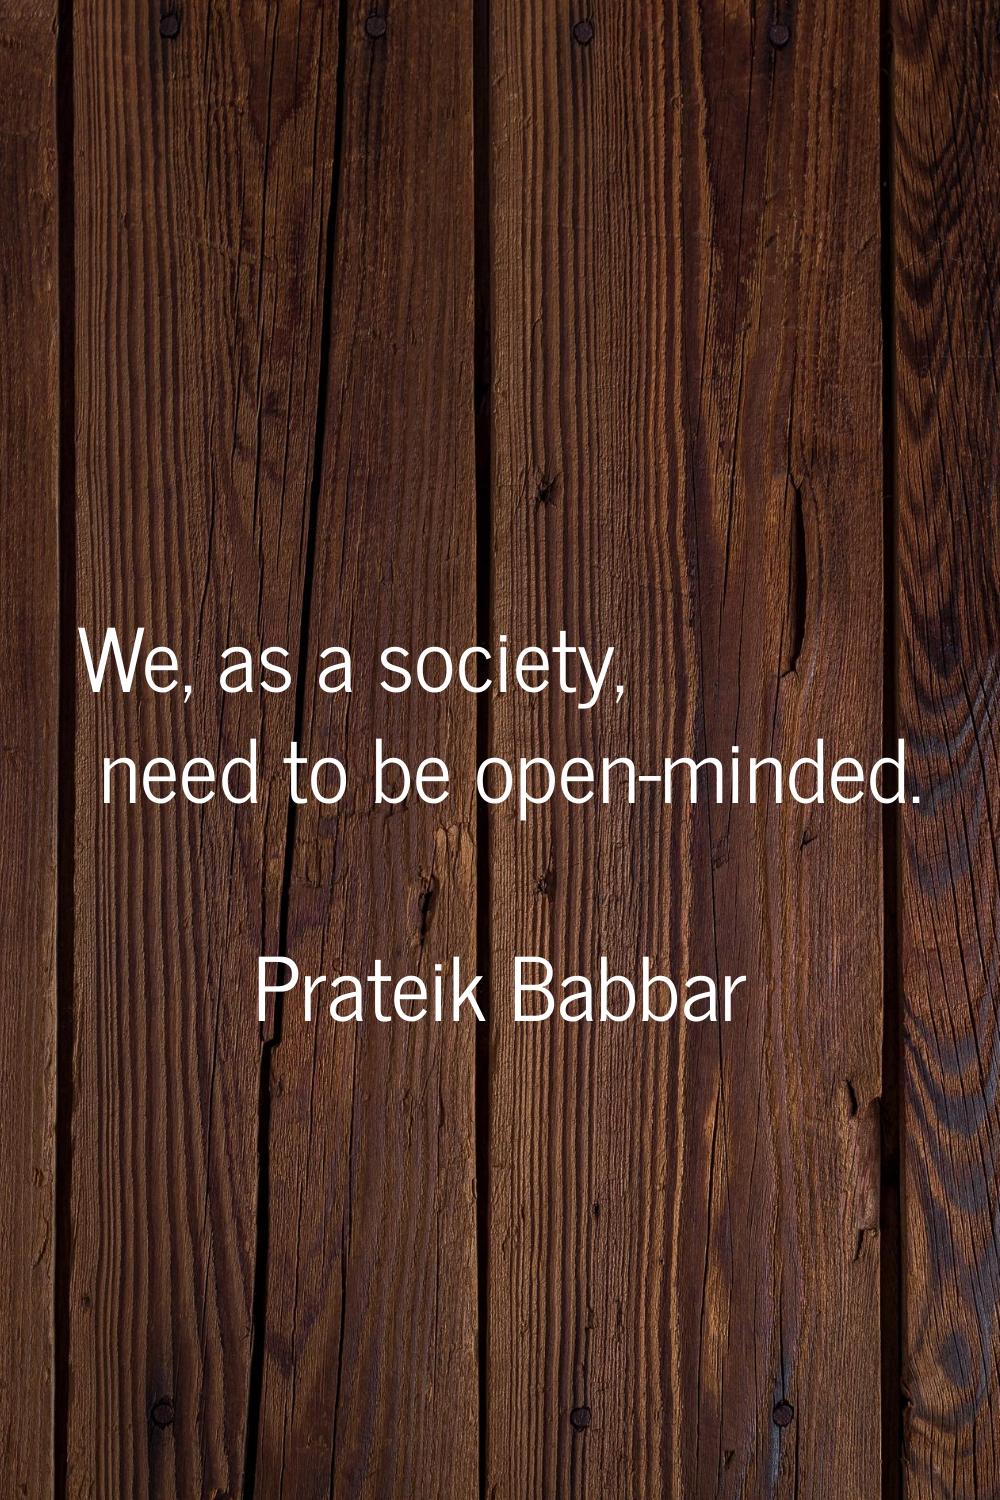 We, as a society, need to be open-minded.